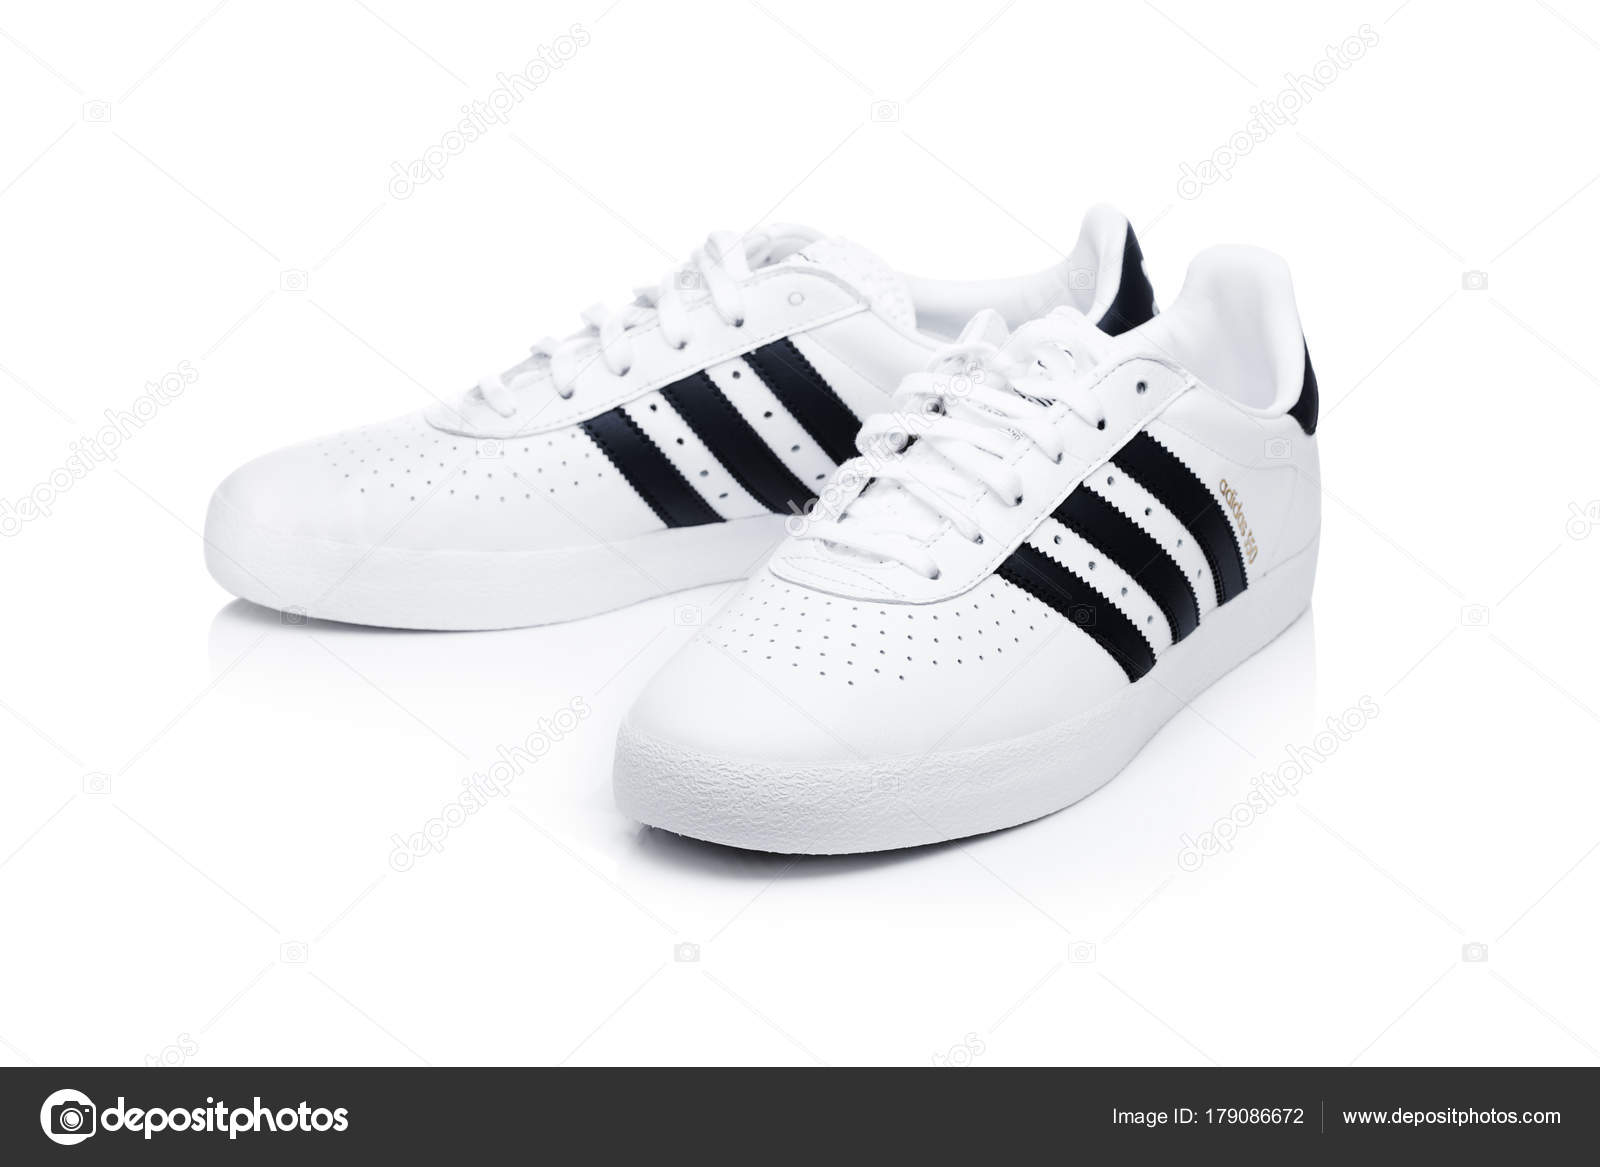 adidas, Shoes, Apparel, & Accessories